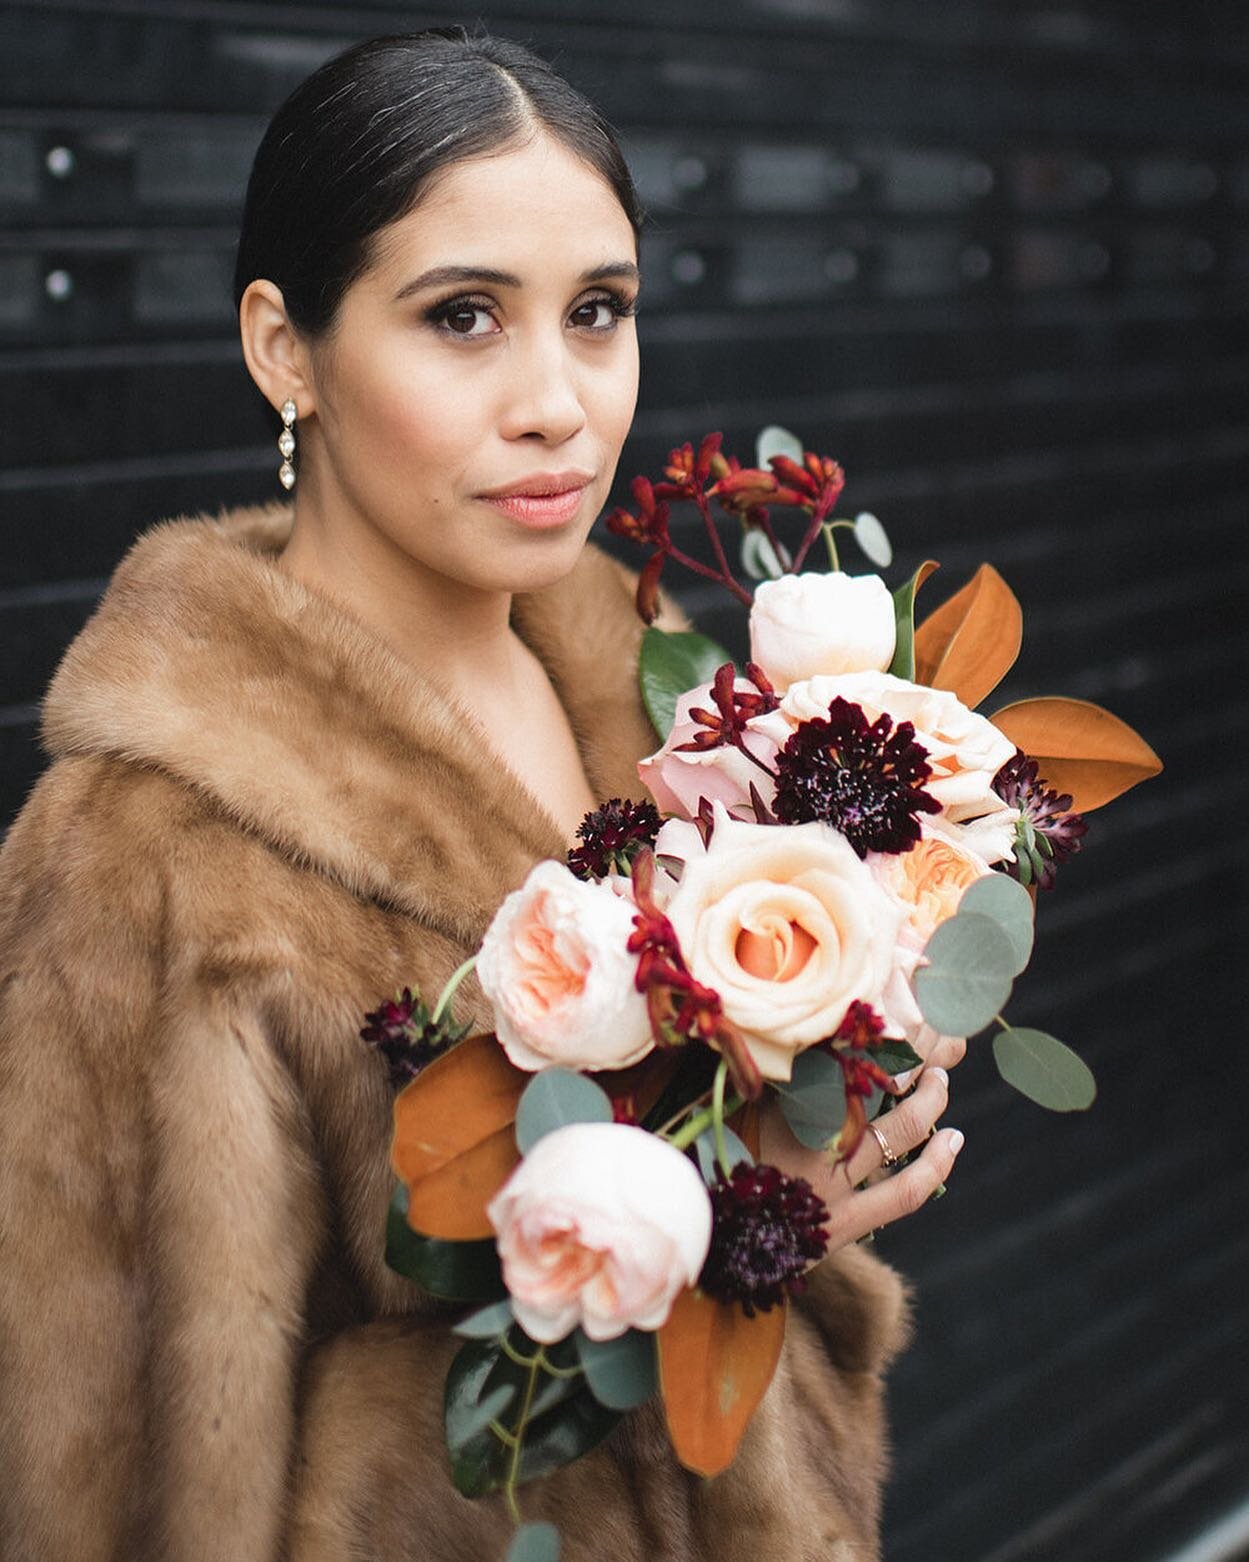 Looking forward to all the moody flower vibes of autumn 🍁🍂🍁🍂

pictured here, the beautiful bride @_aliciana. Photography by one of my favorite photography teams @aseaoflove
*
*
*
*
*
#thursdayvibes #fallflowers #2020wedding #moodygrams #moodyflor